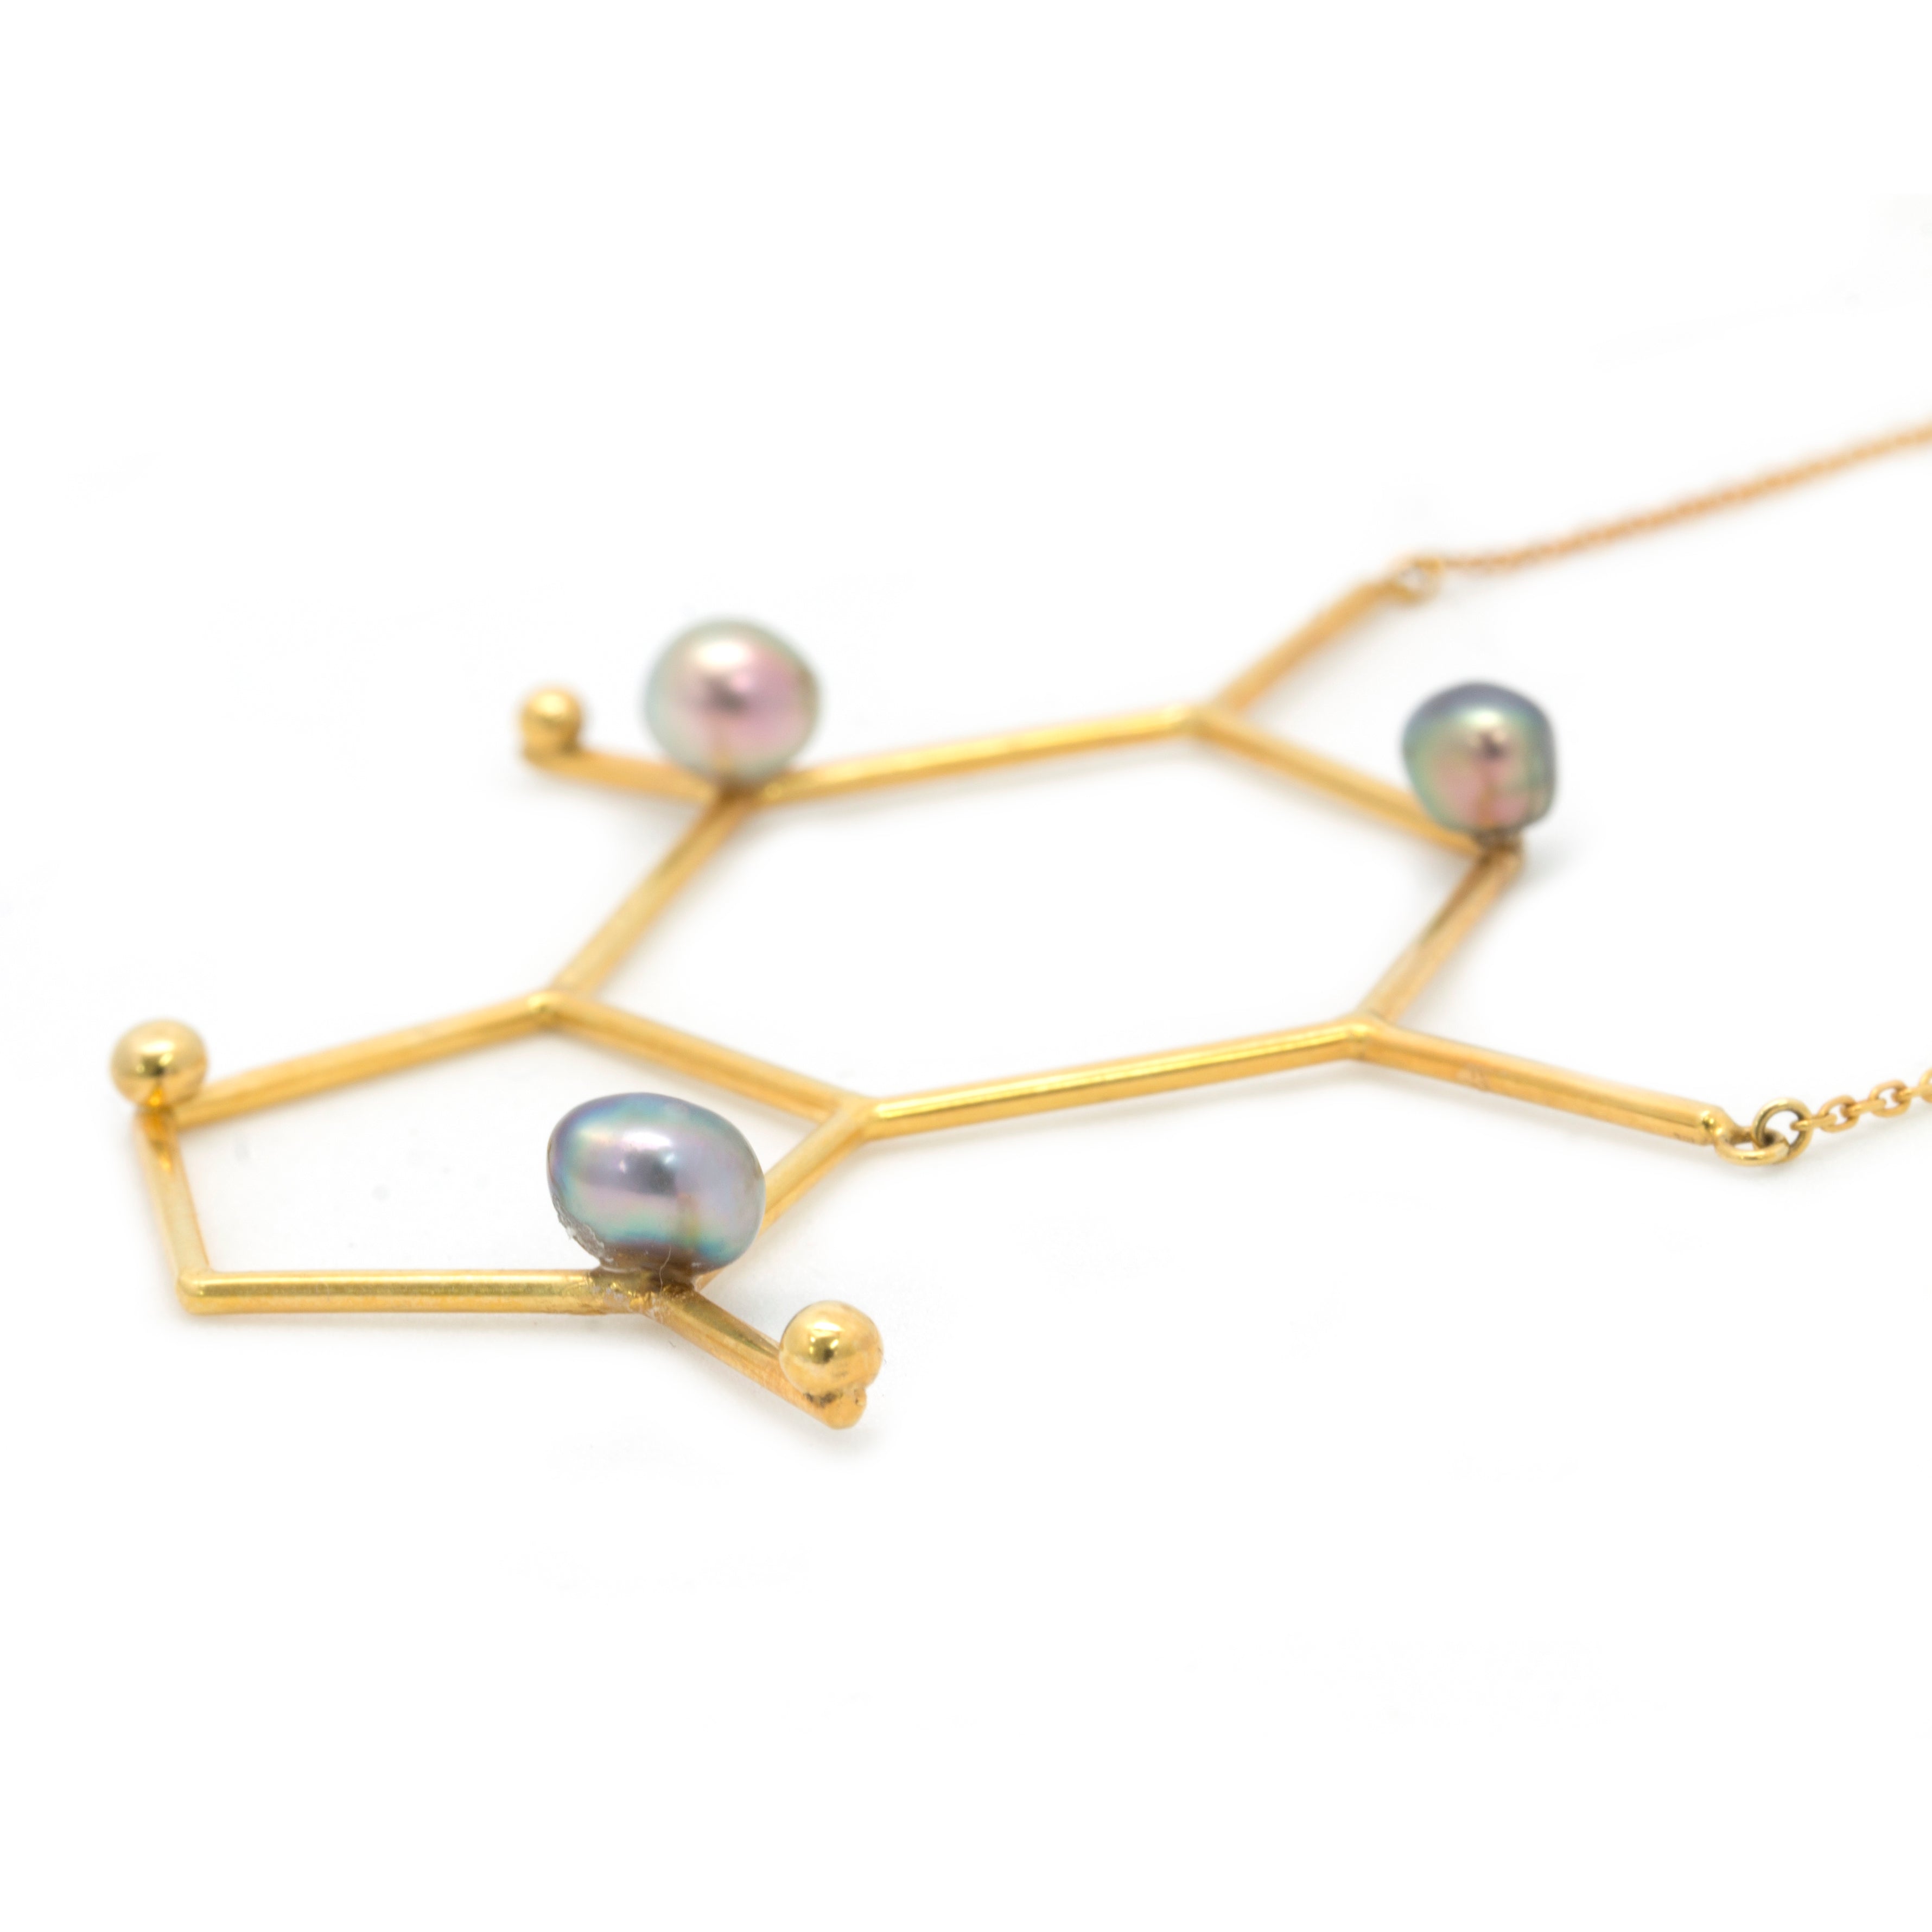 "Caffeine" 14K Yellow Gold Pendant and Chain with Cortez Keshi Pearls